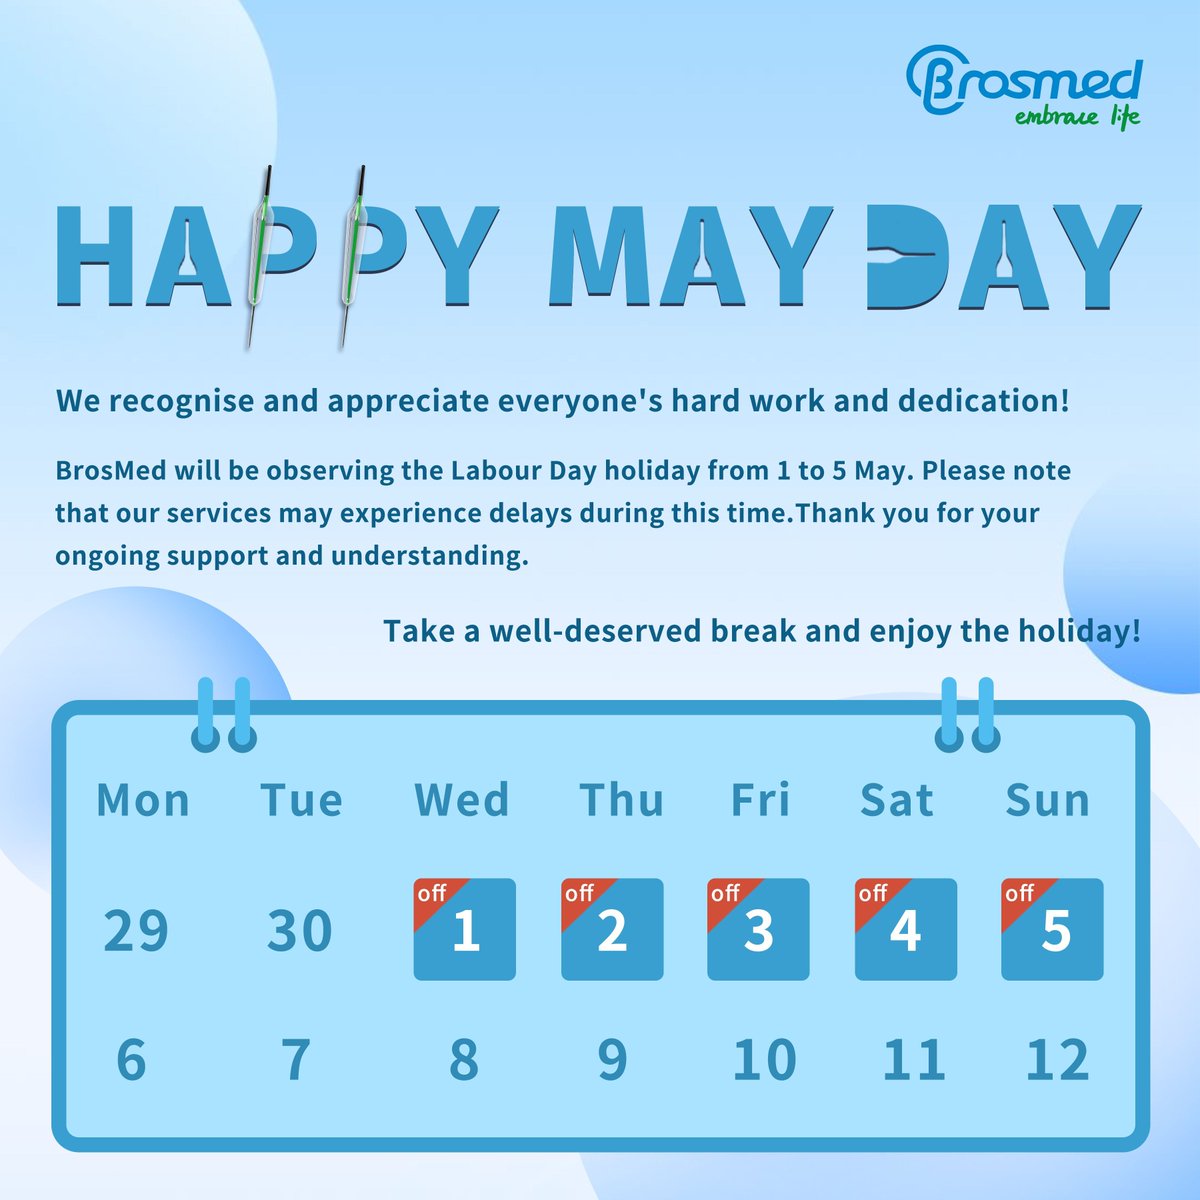 As the world gears up to celebrate May Day, we at BrosMed want to express our deepest appreciation for the hard work and commitment shown by workers everywhere. Wishing you all a relaxing and enjoyable Labor Day holiday! 💼🌟
#HolidayNotice #LaborDay #MayDay #ThankYouWorkers